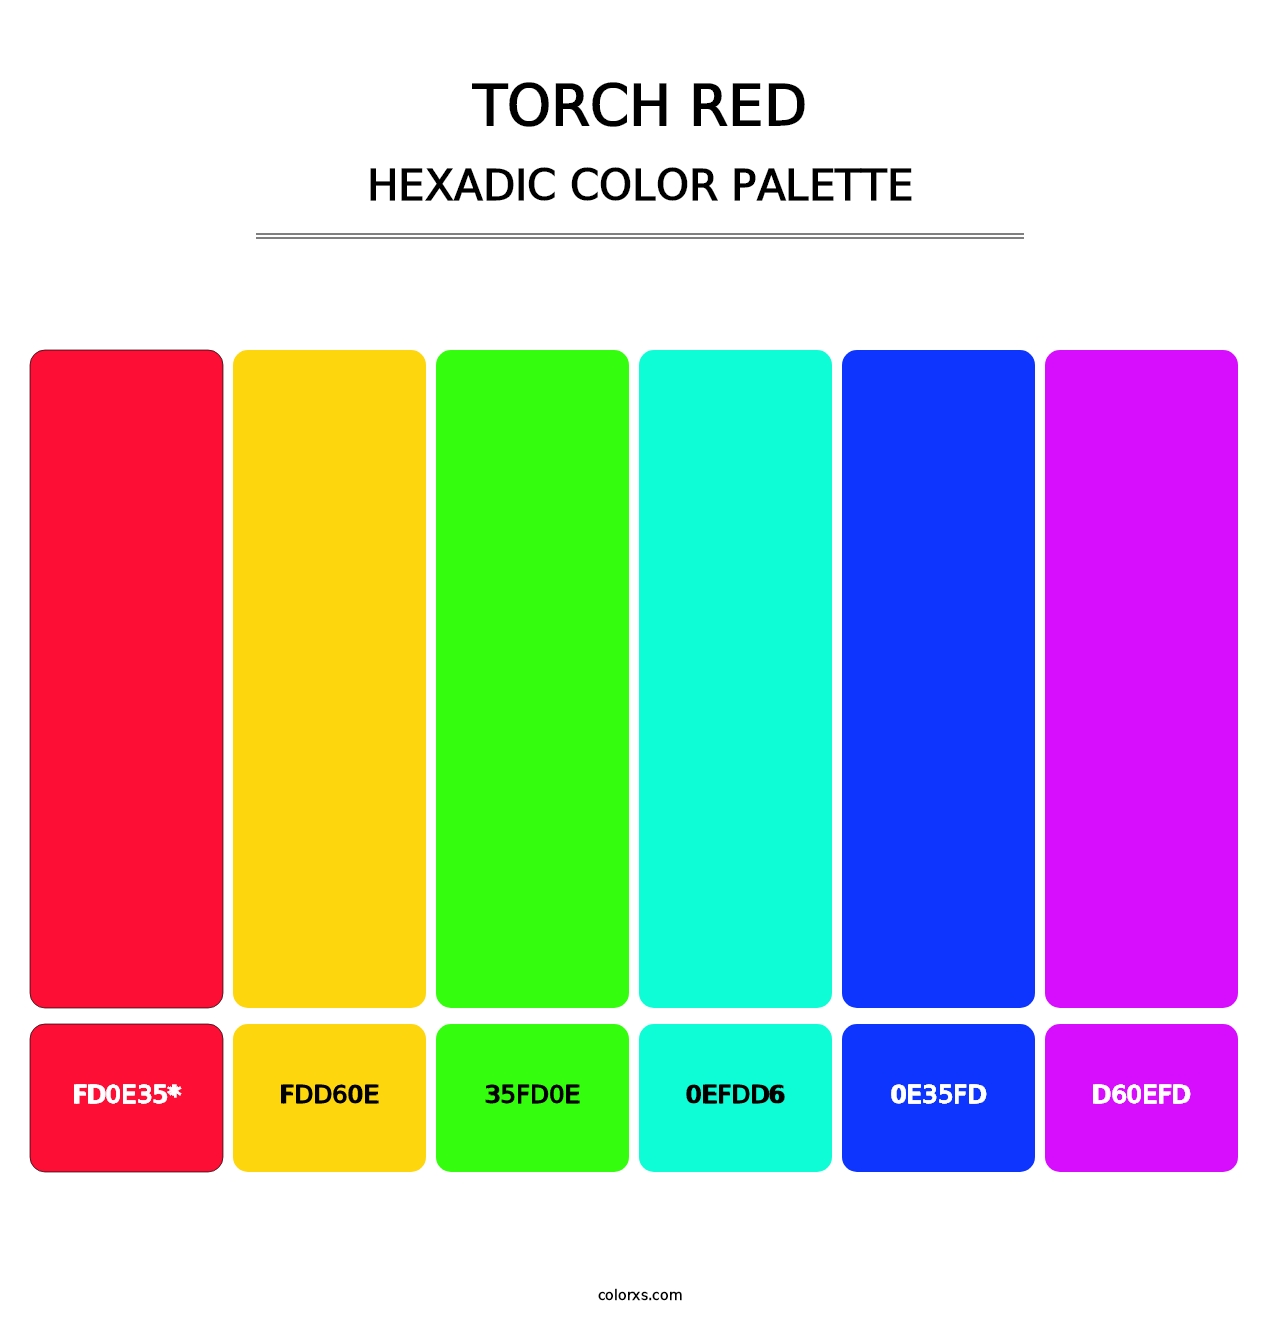 Torch Red - Hexadic Color Palette